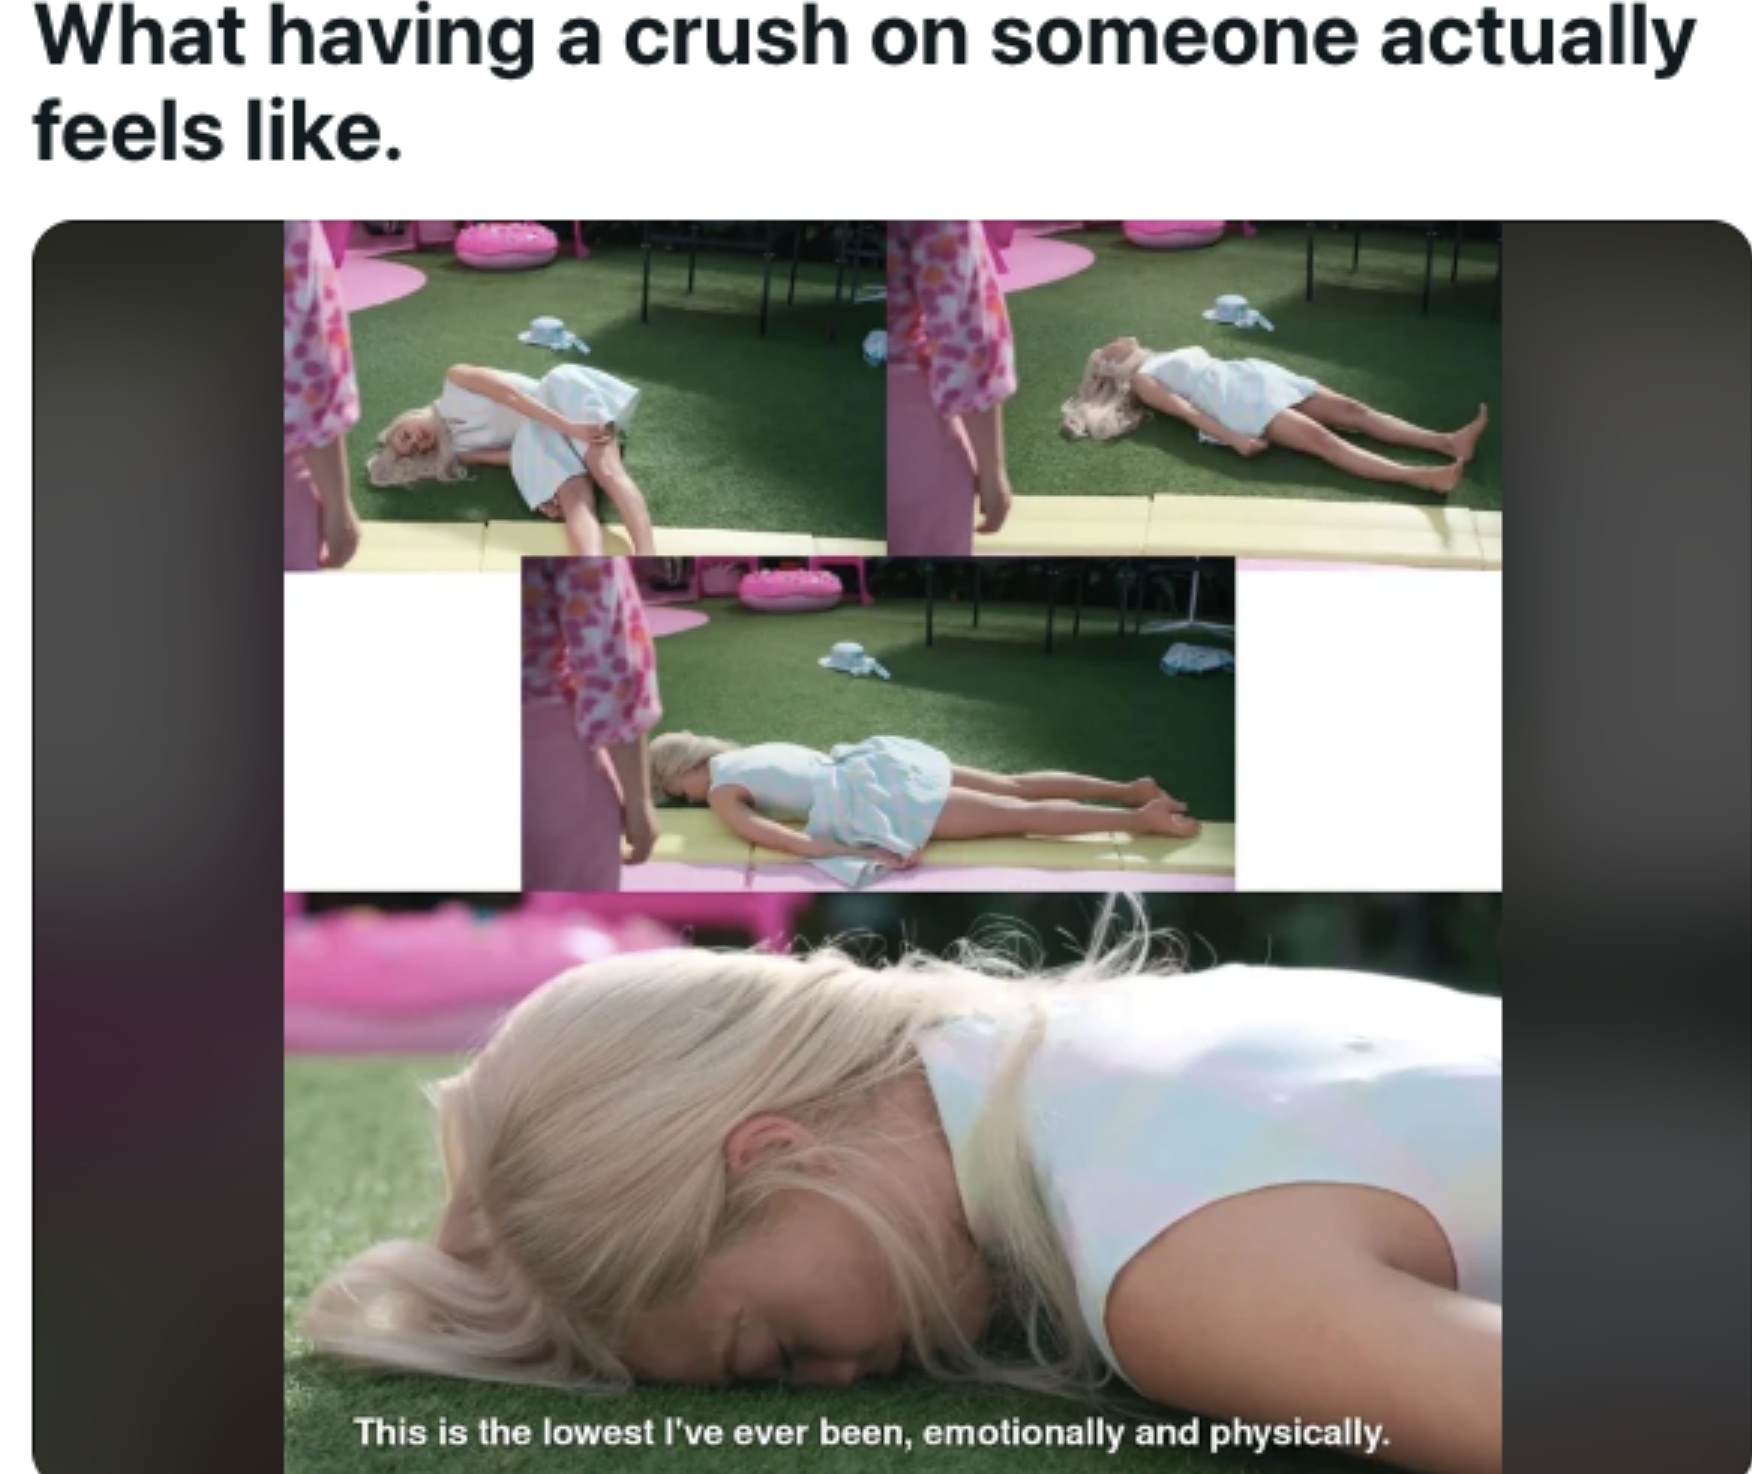 20 Relationship Memes and Tweets to Help You Feel Lonely